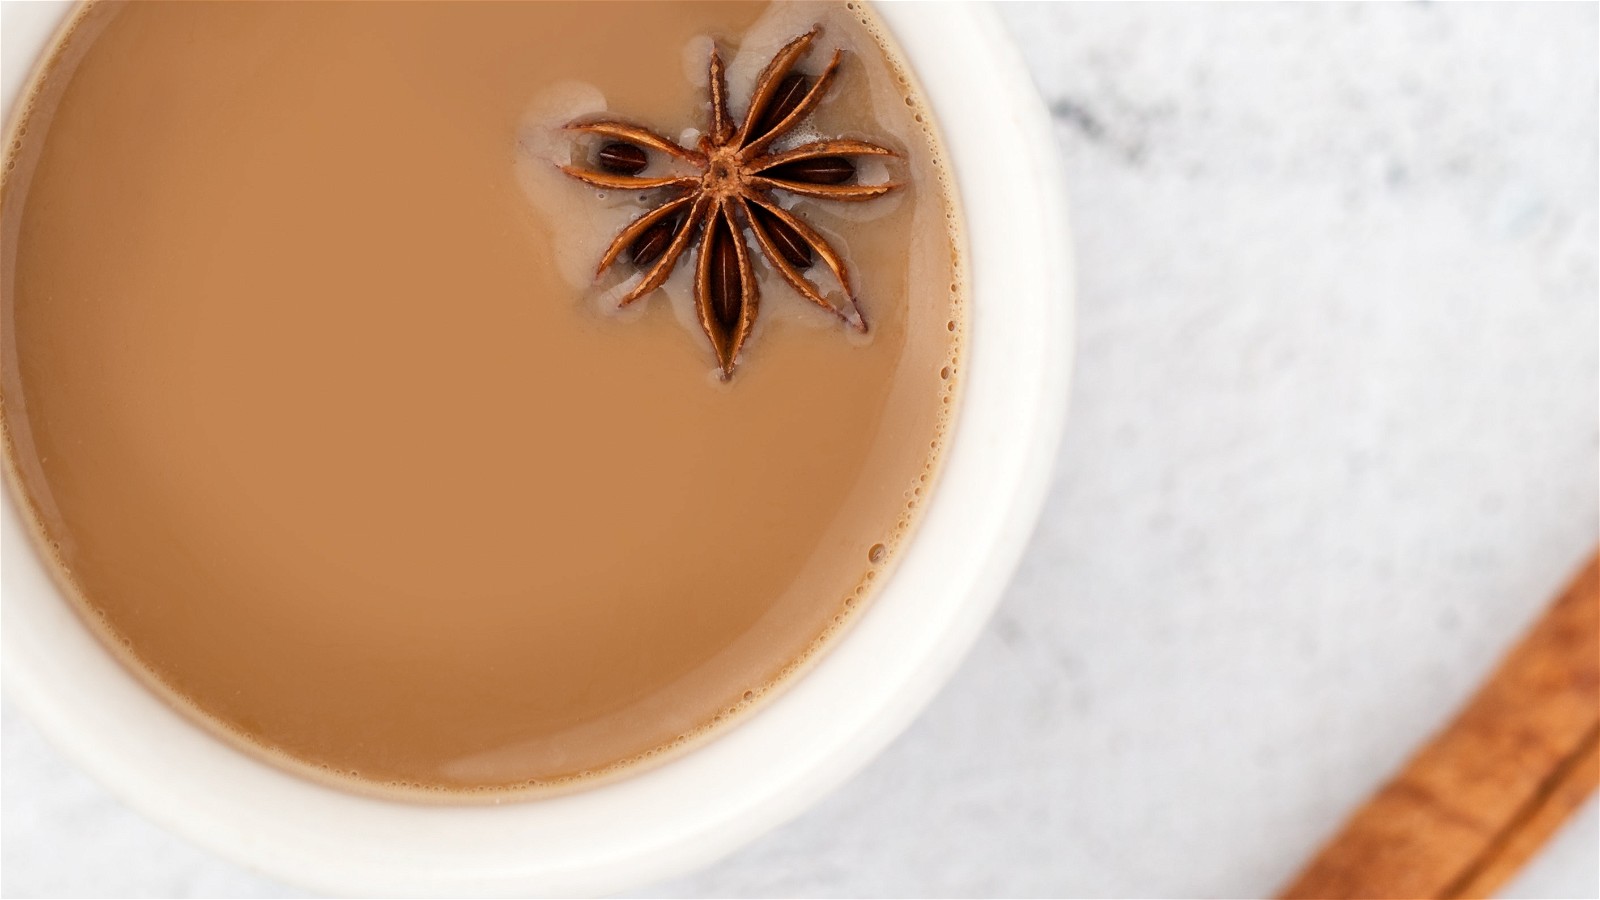 Image of Homemade Chai Tea from Loose Leaf Blend